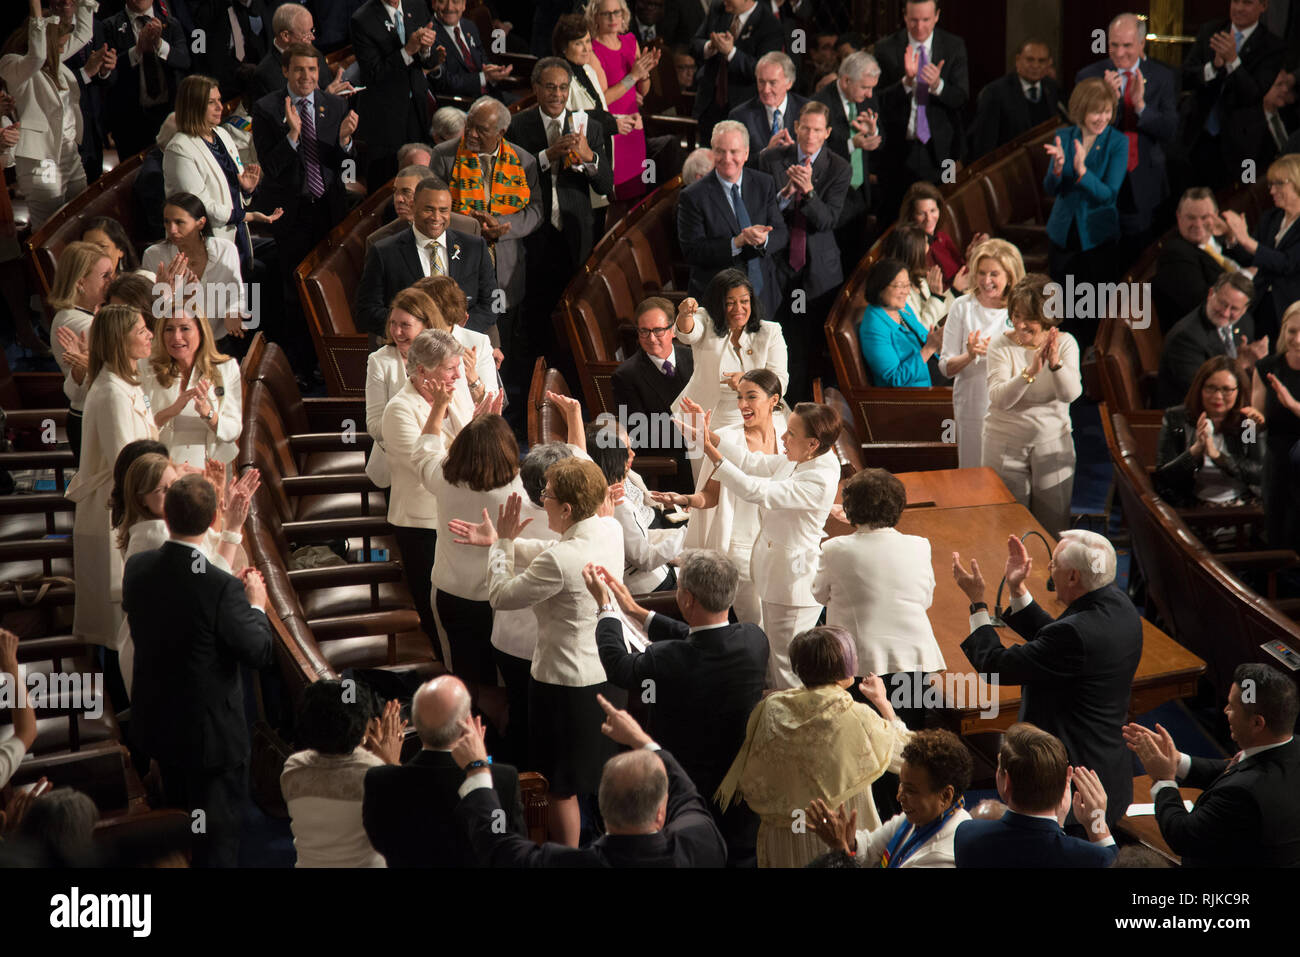 Washington, USA. 05th Feb, 2019. Washington DC, February 5, 2019, USA: Congressional Women Democrats take a moment to cheer earch other during President Donald J Trump second State of the Union (SOTU) address as President. House Speaker Nancy Pelosi and Vice President Mike Pence sit behind him in the US Capitol House of Representatives. Credit: Patsy Lynch/Alamy Live News Stock Photo